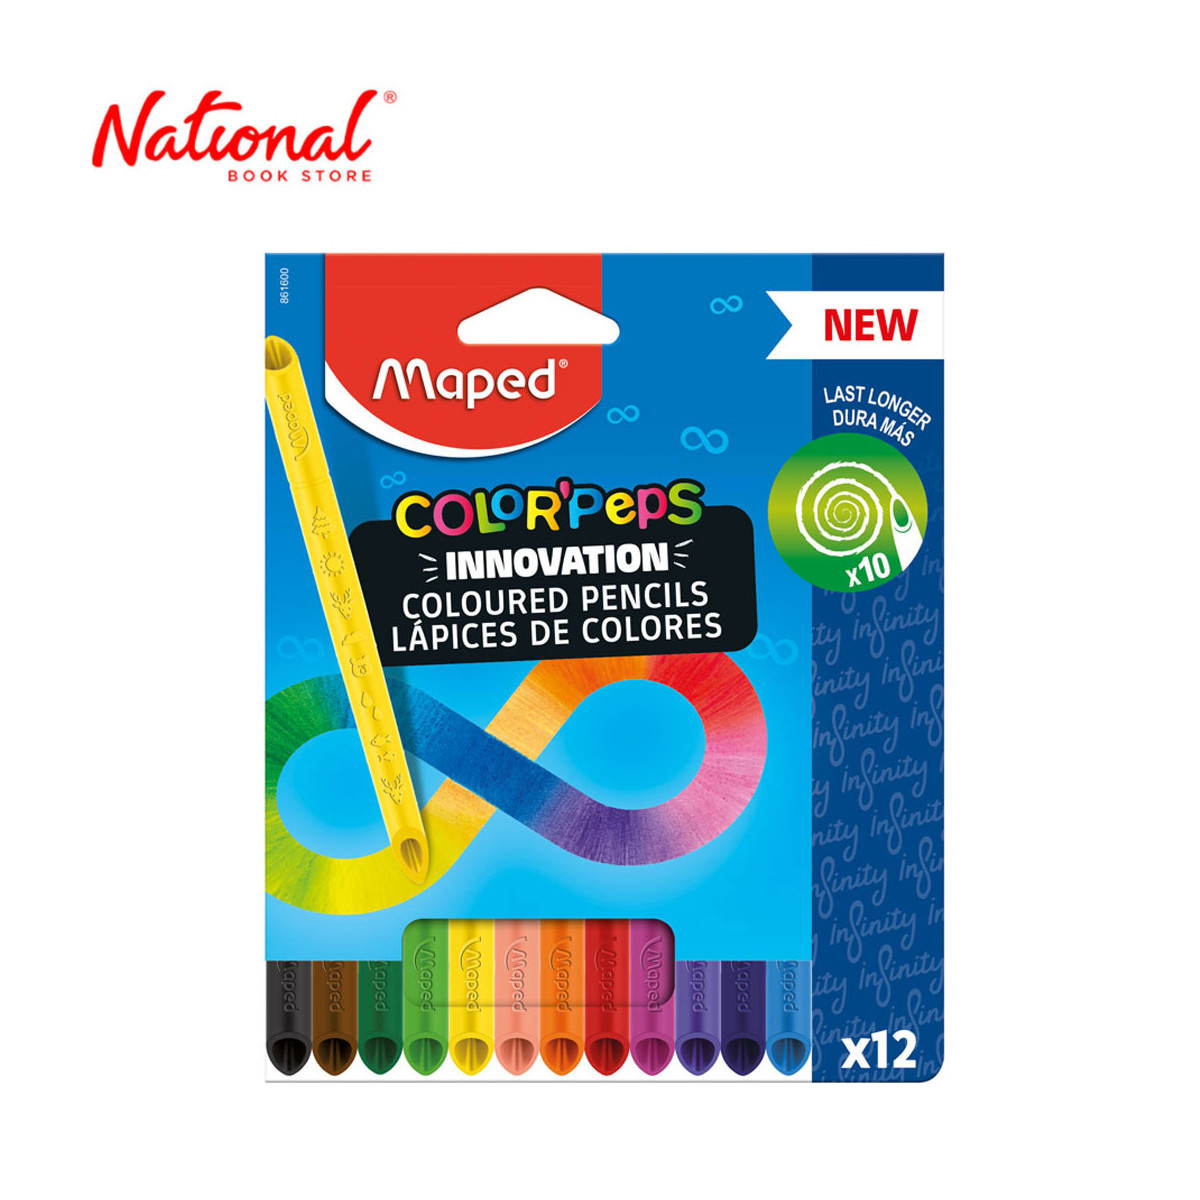 Maped Color'peps Colored Pencil Innovation - School Supplies - Art Supplies